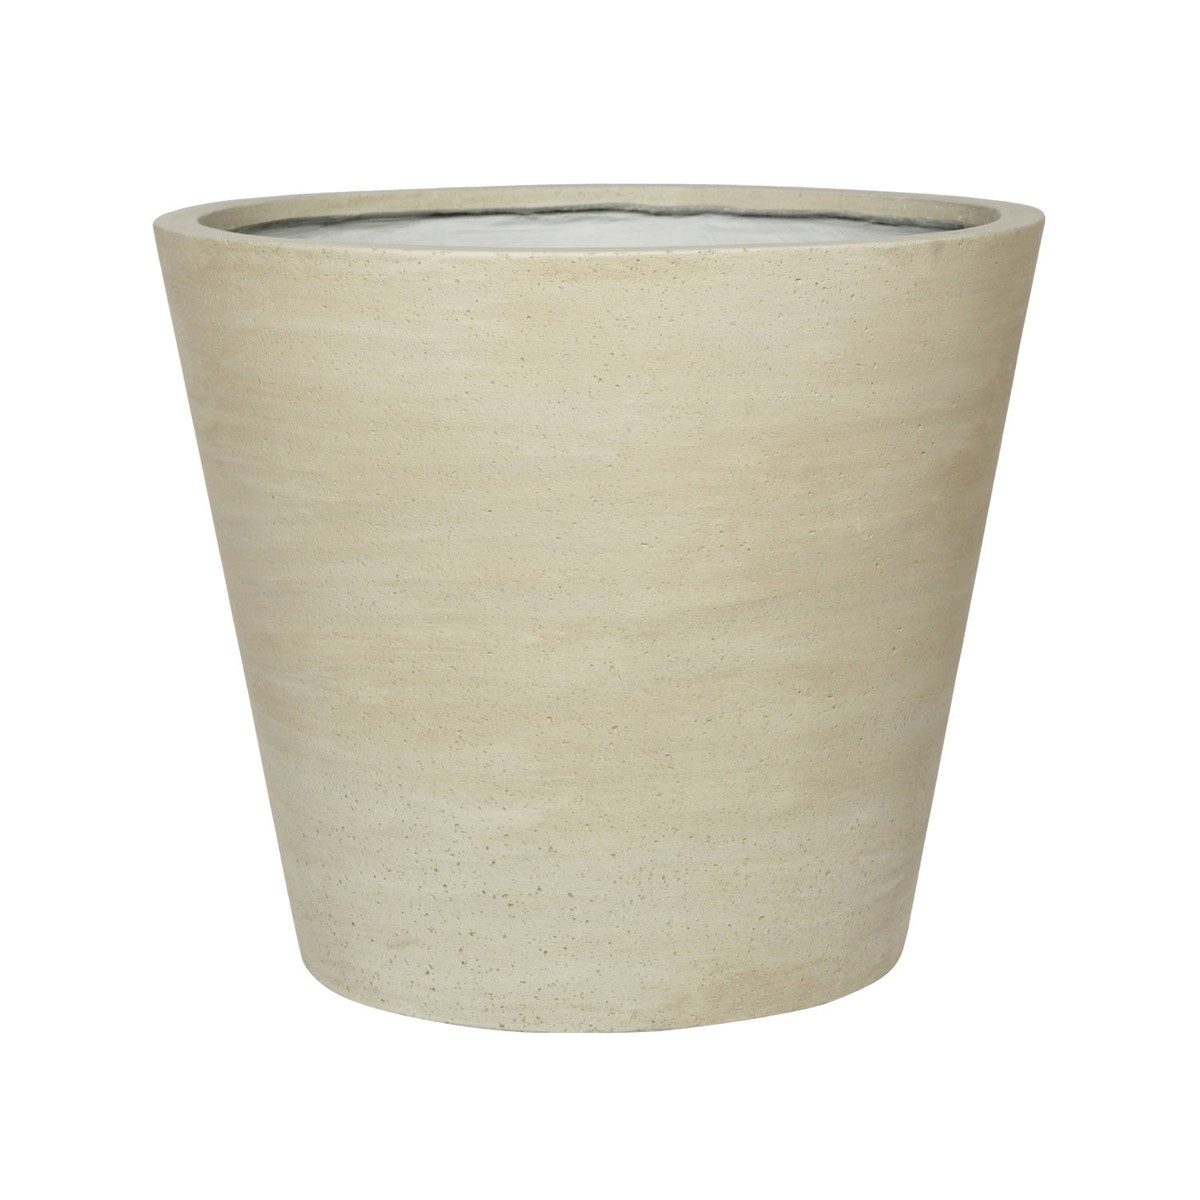 Potterypots Cement and Stone Bucket M Beige Washed Beige clair 49.5x40cm 55L